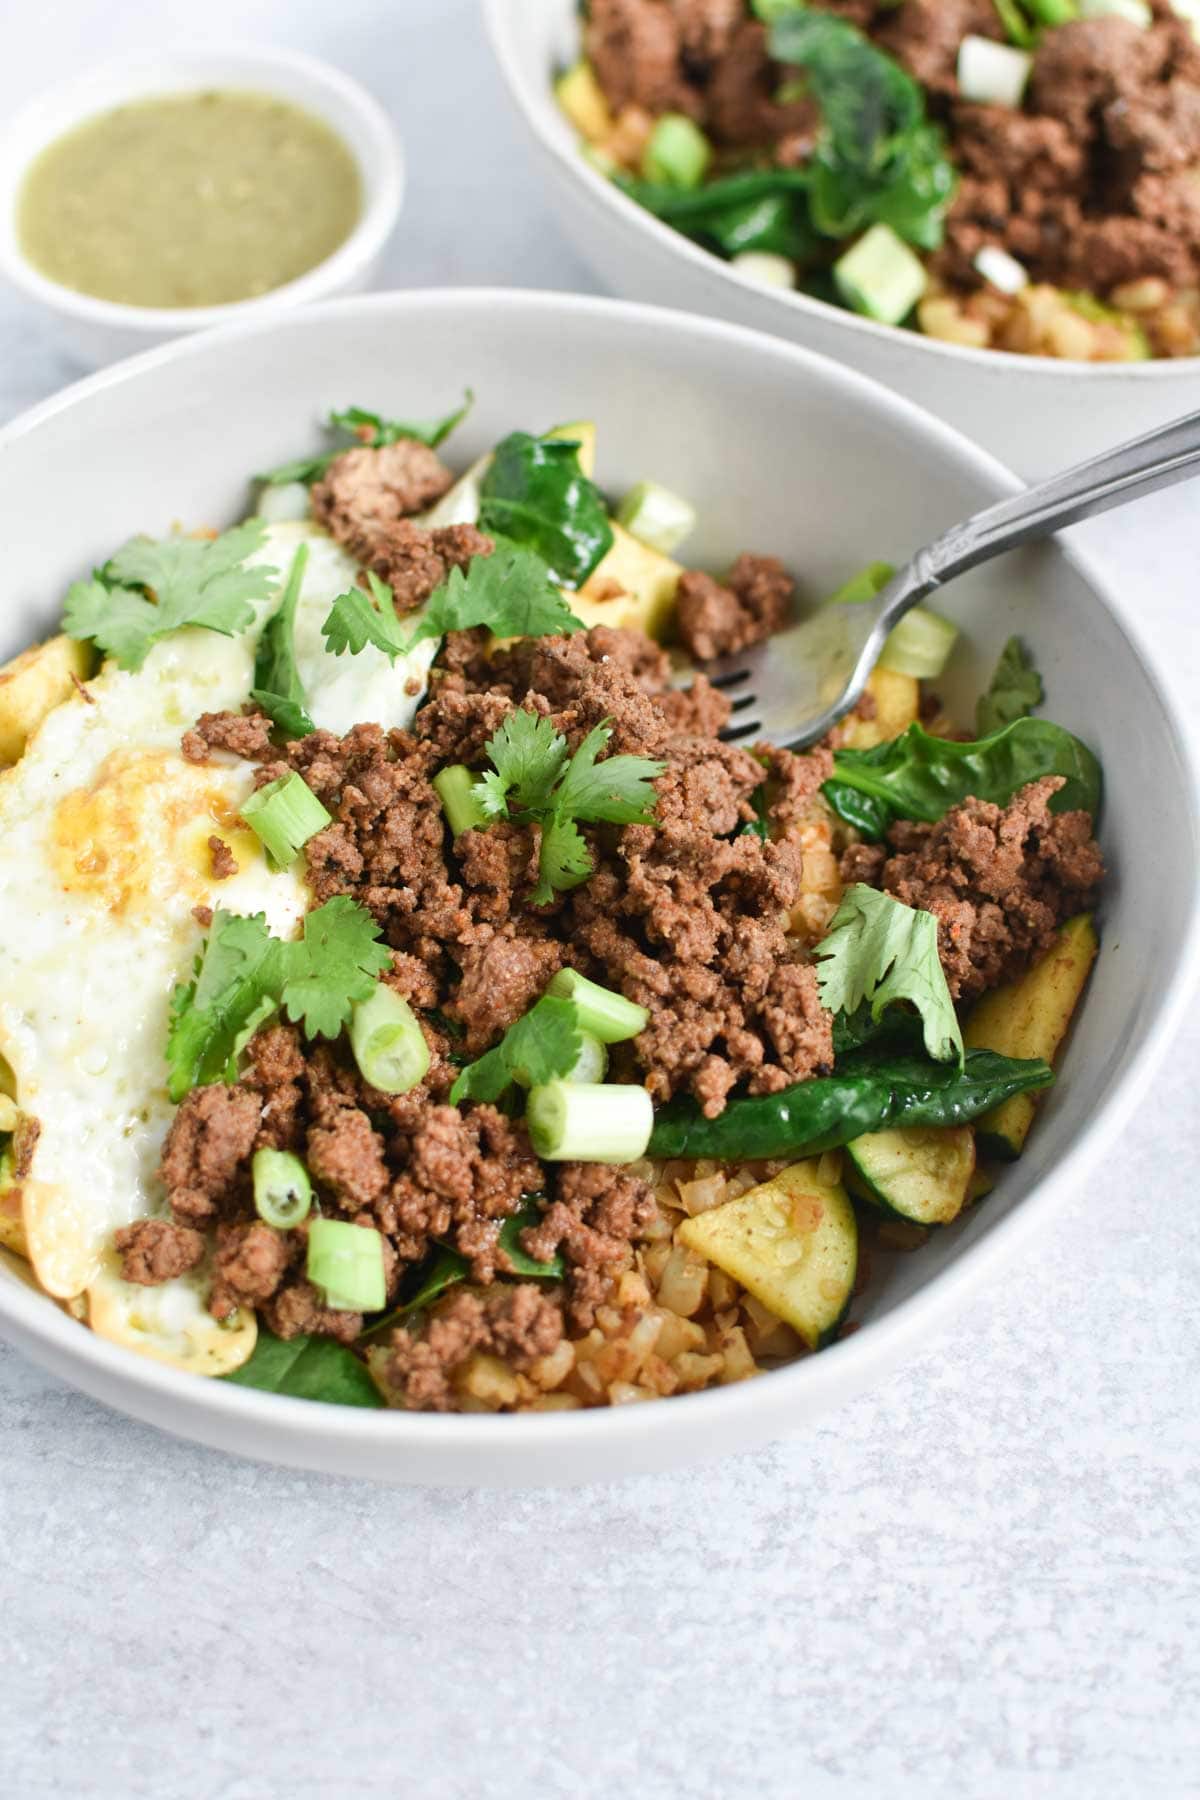 Ground beef, eggs, and green onion in a white bowl with a fork.